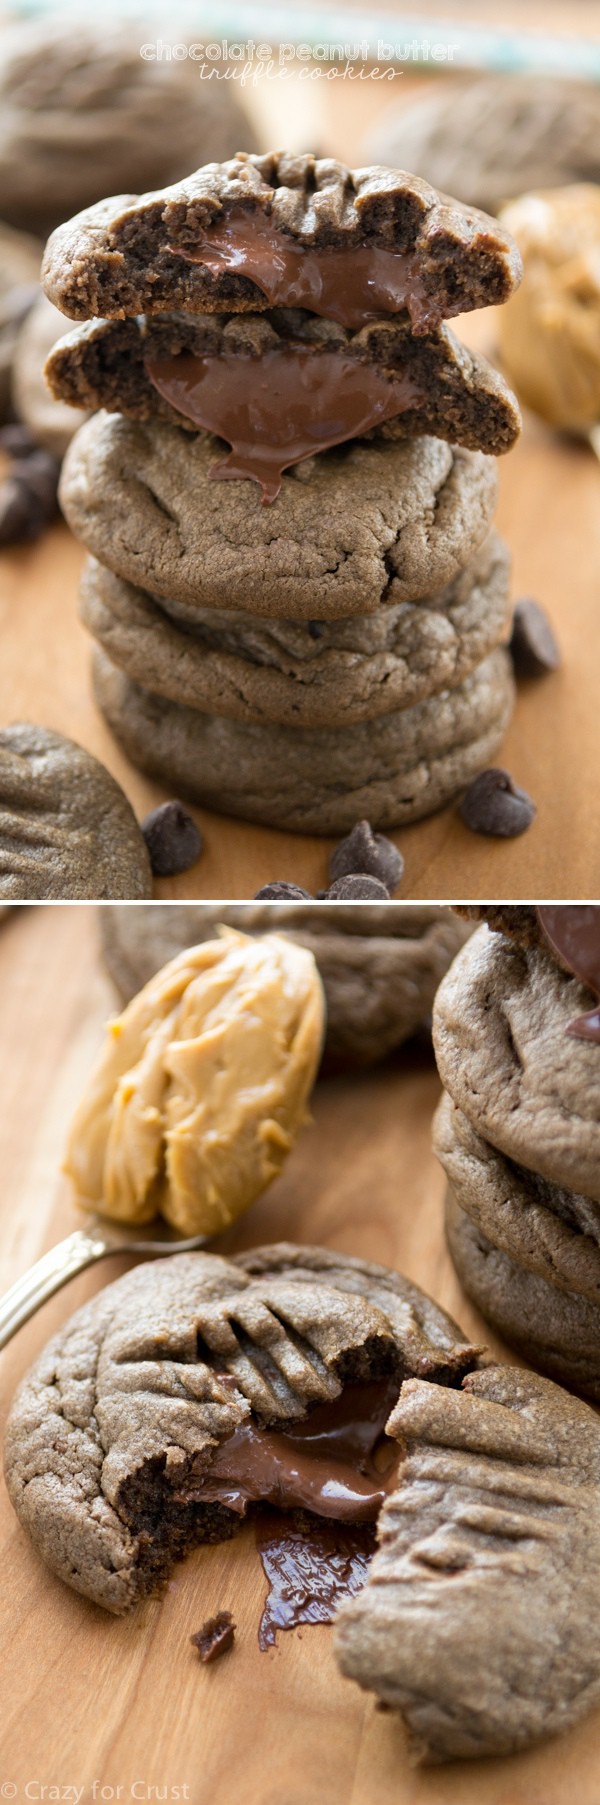 Chocolate Peanut Butter Truffle Cookies are a chocolate peanut butter cookie and they're filled with a peanut butter chocolate truffle!